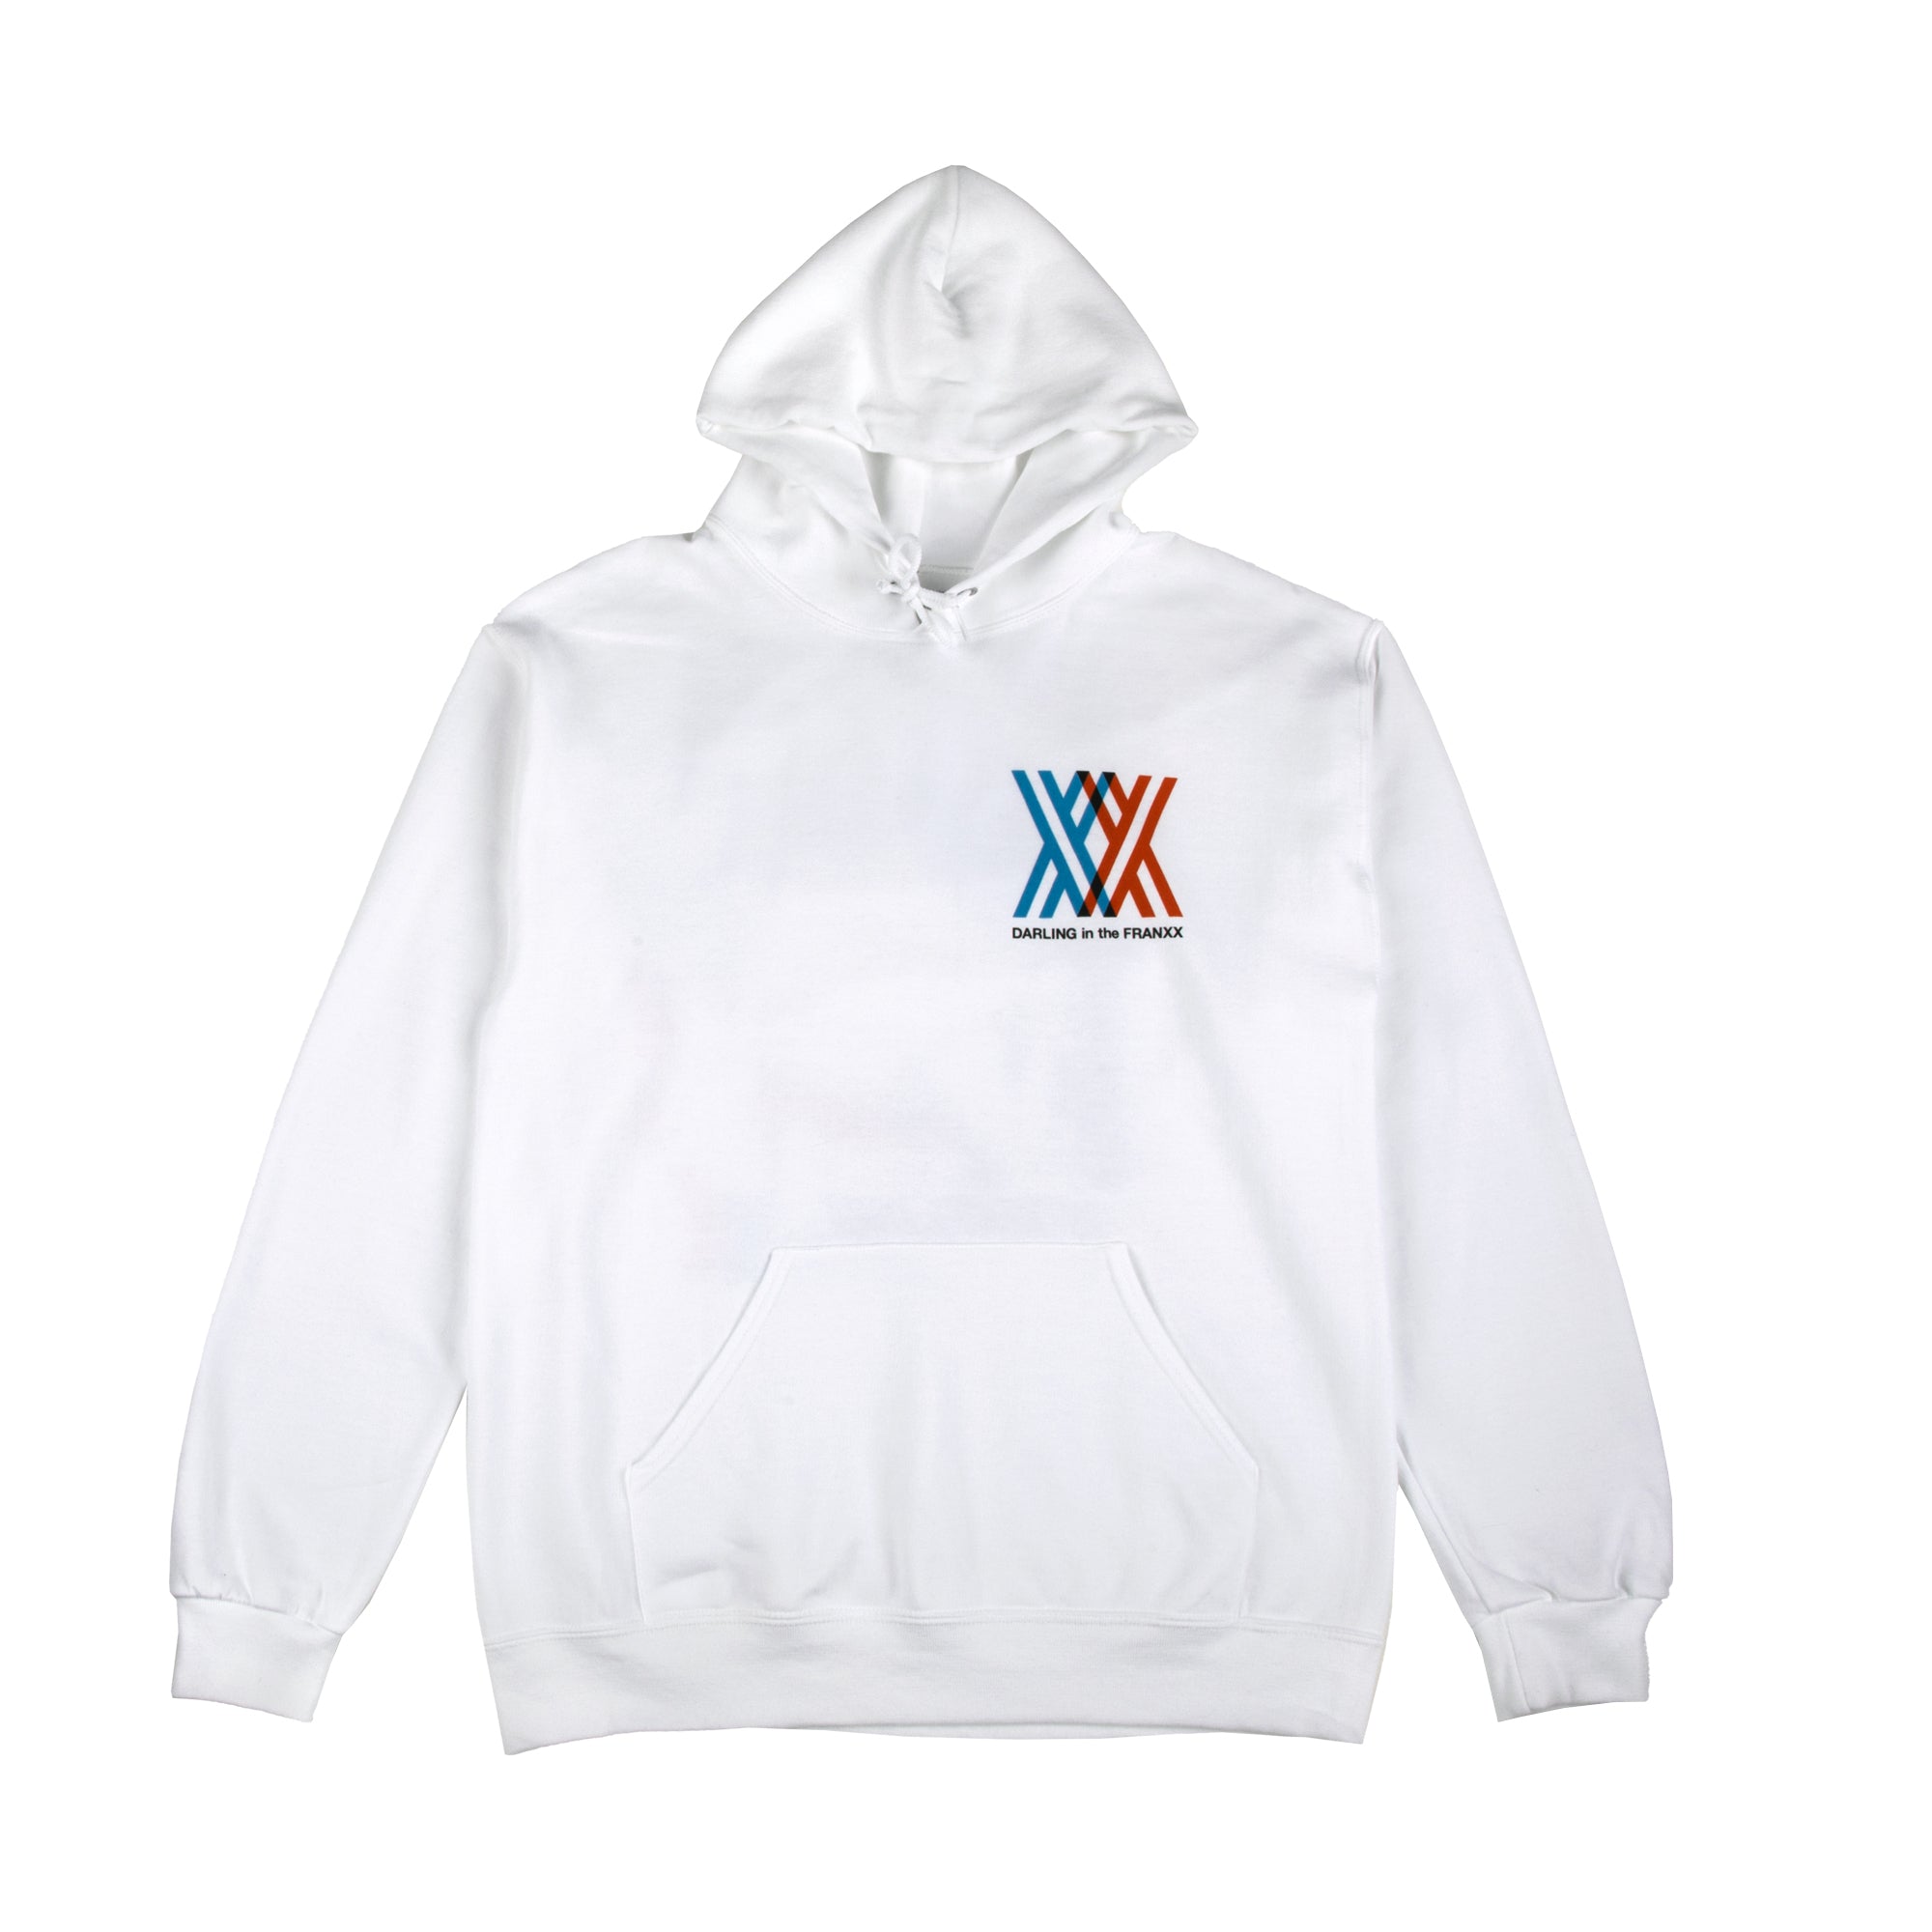 DARLING in the FRANXX - Zero Two Tongue Out Hoodie - Crunchyroll Exclusive! image count 2